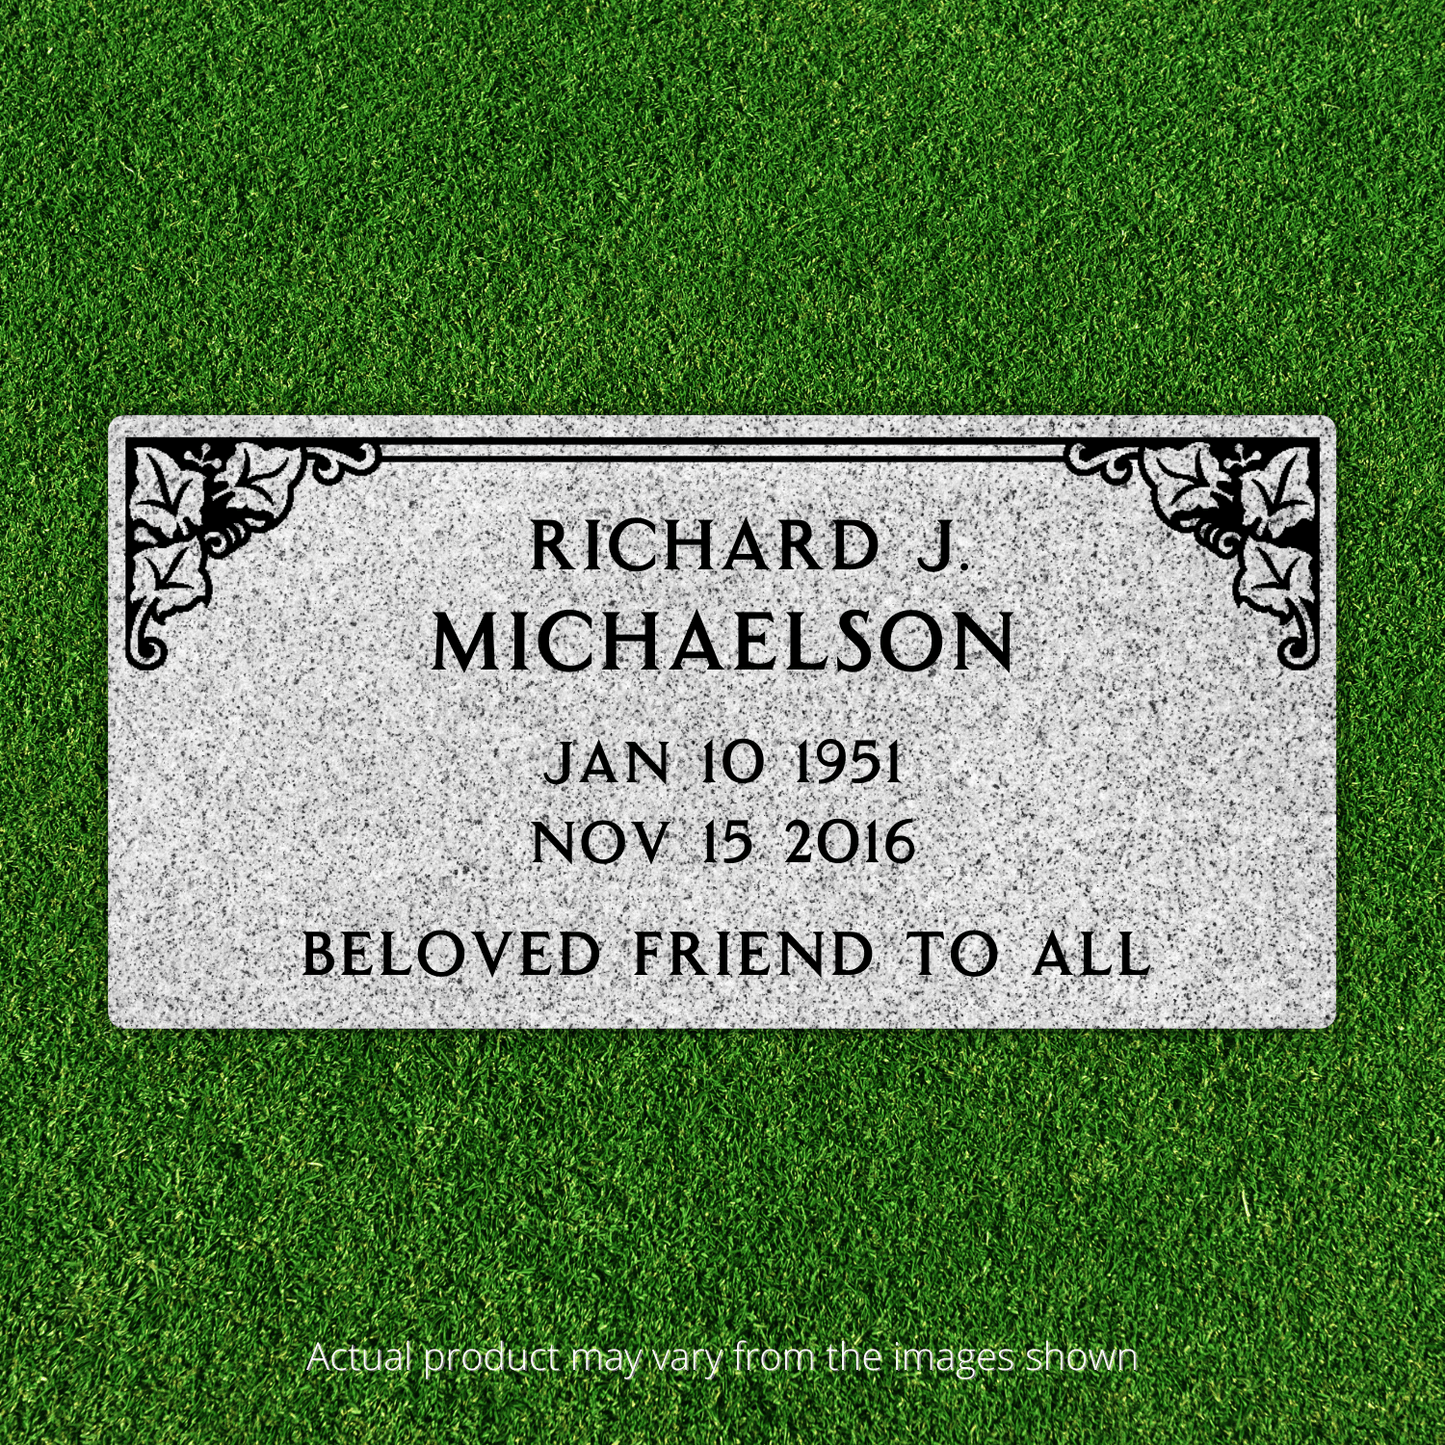 Flat Headstone Marker with Border - (24in x 12in x 4in) - Markers & Headstones